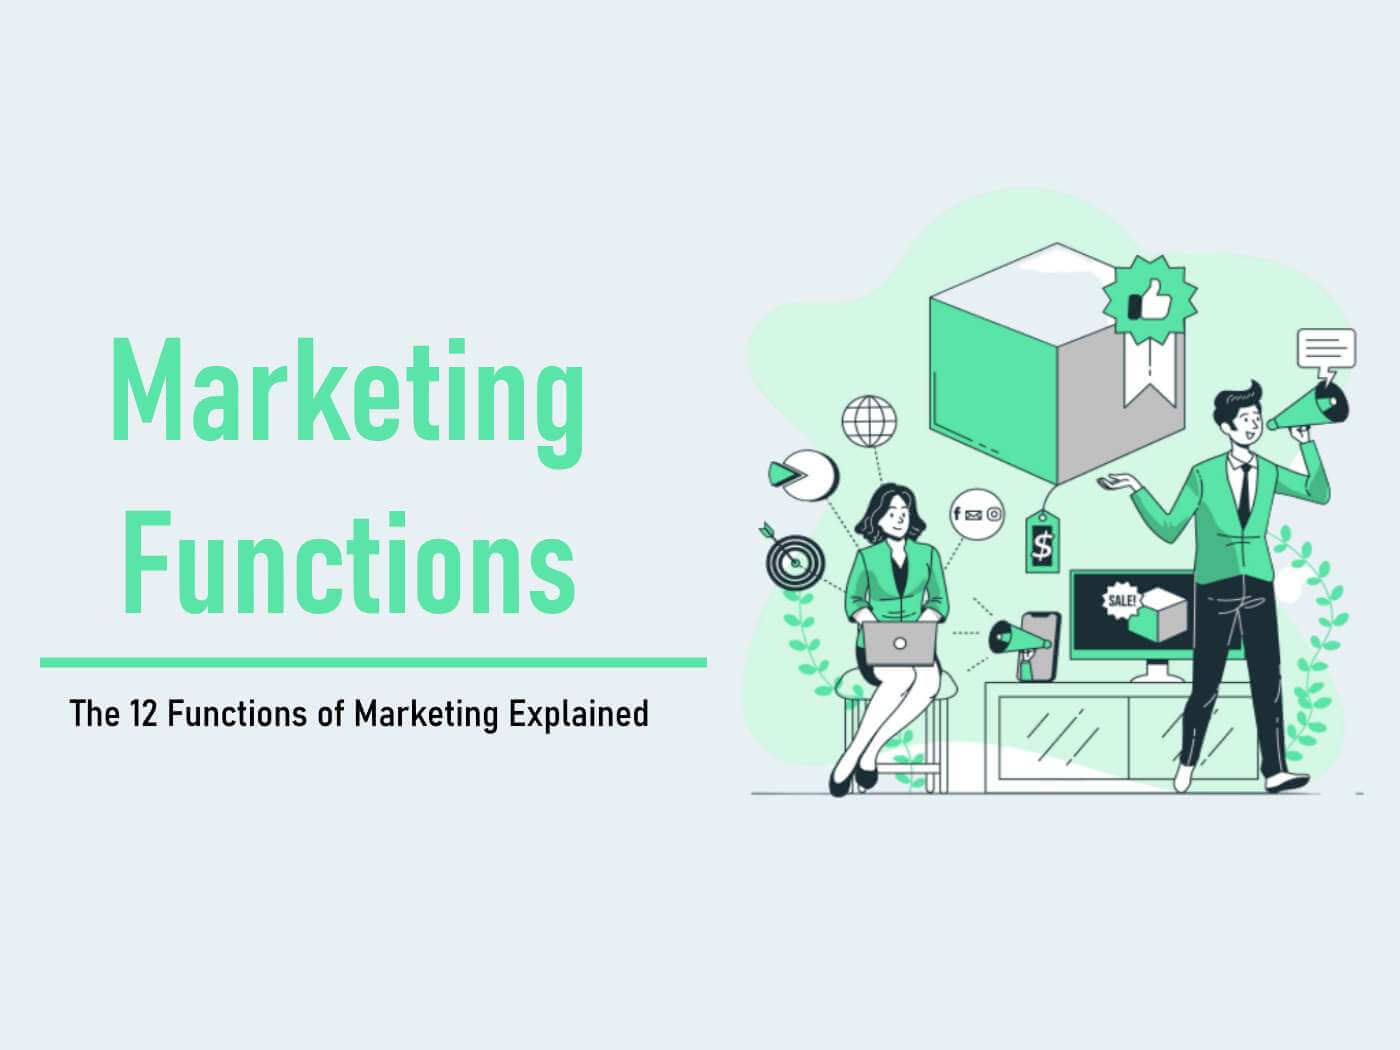 functions of marketing assignment